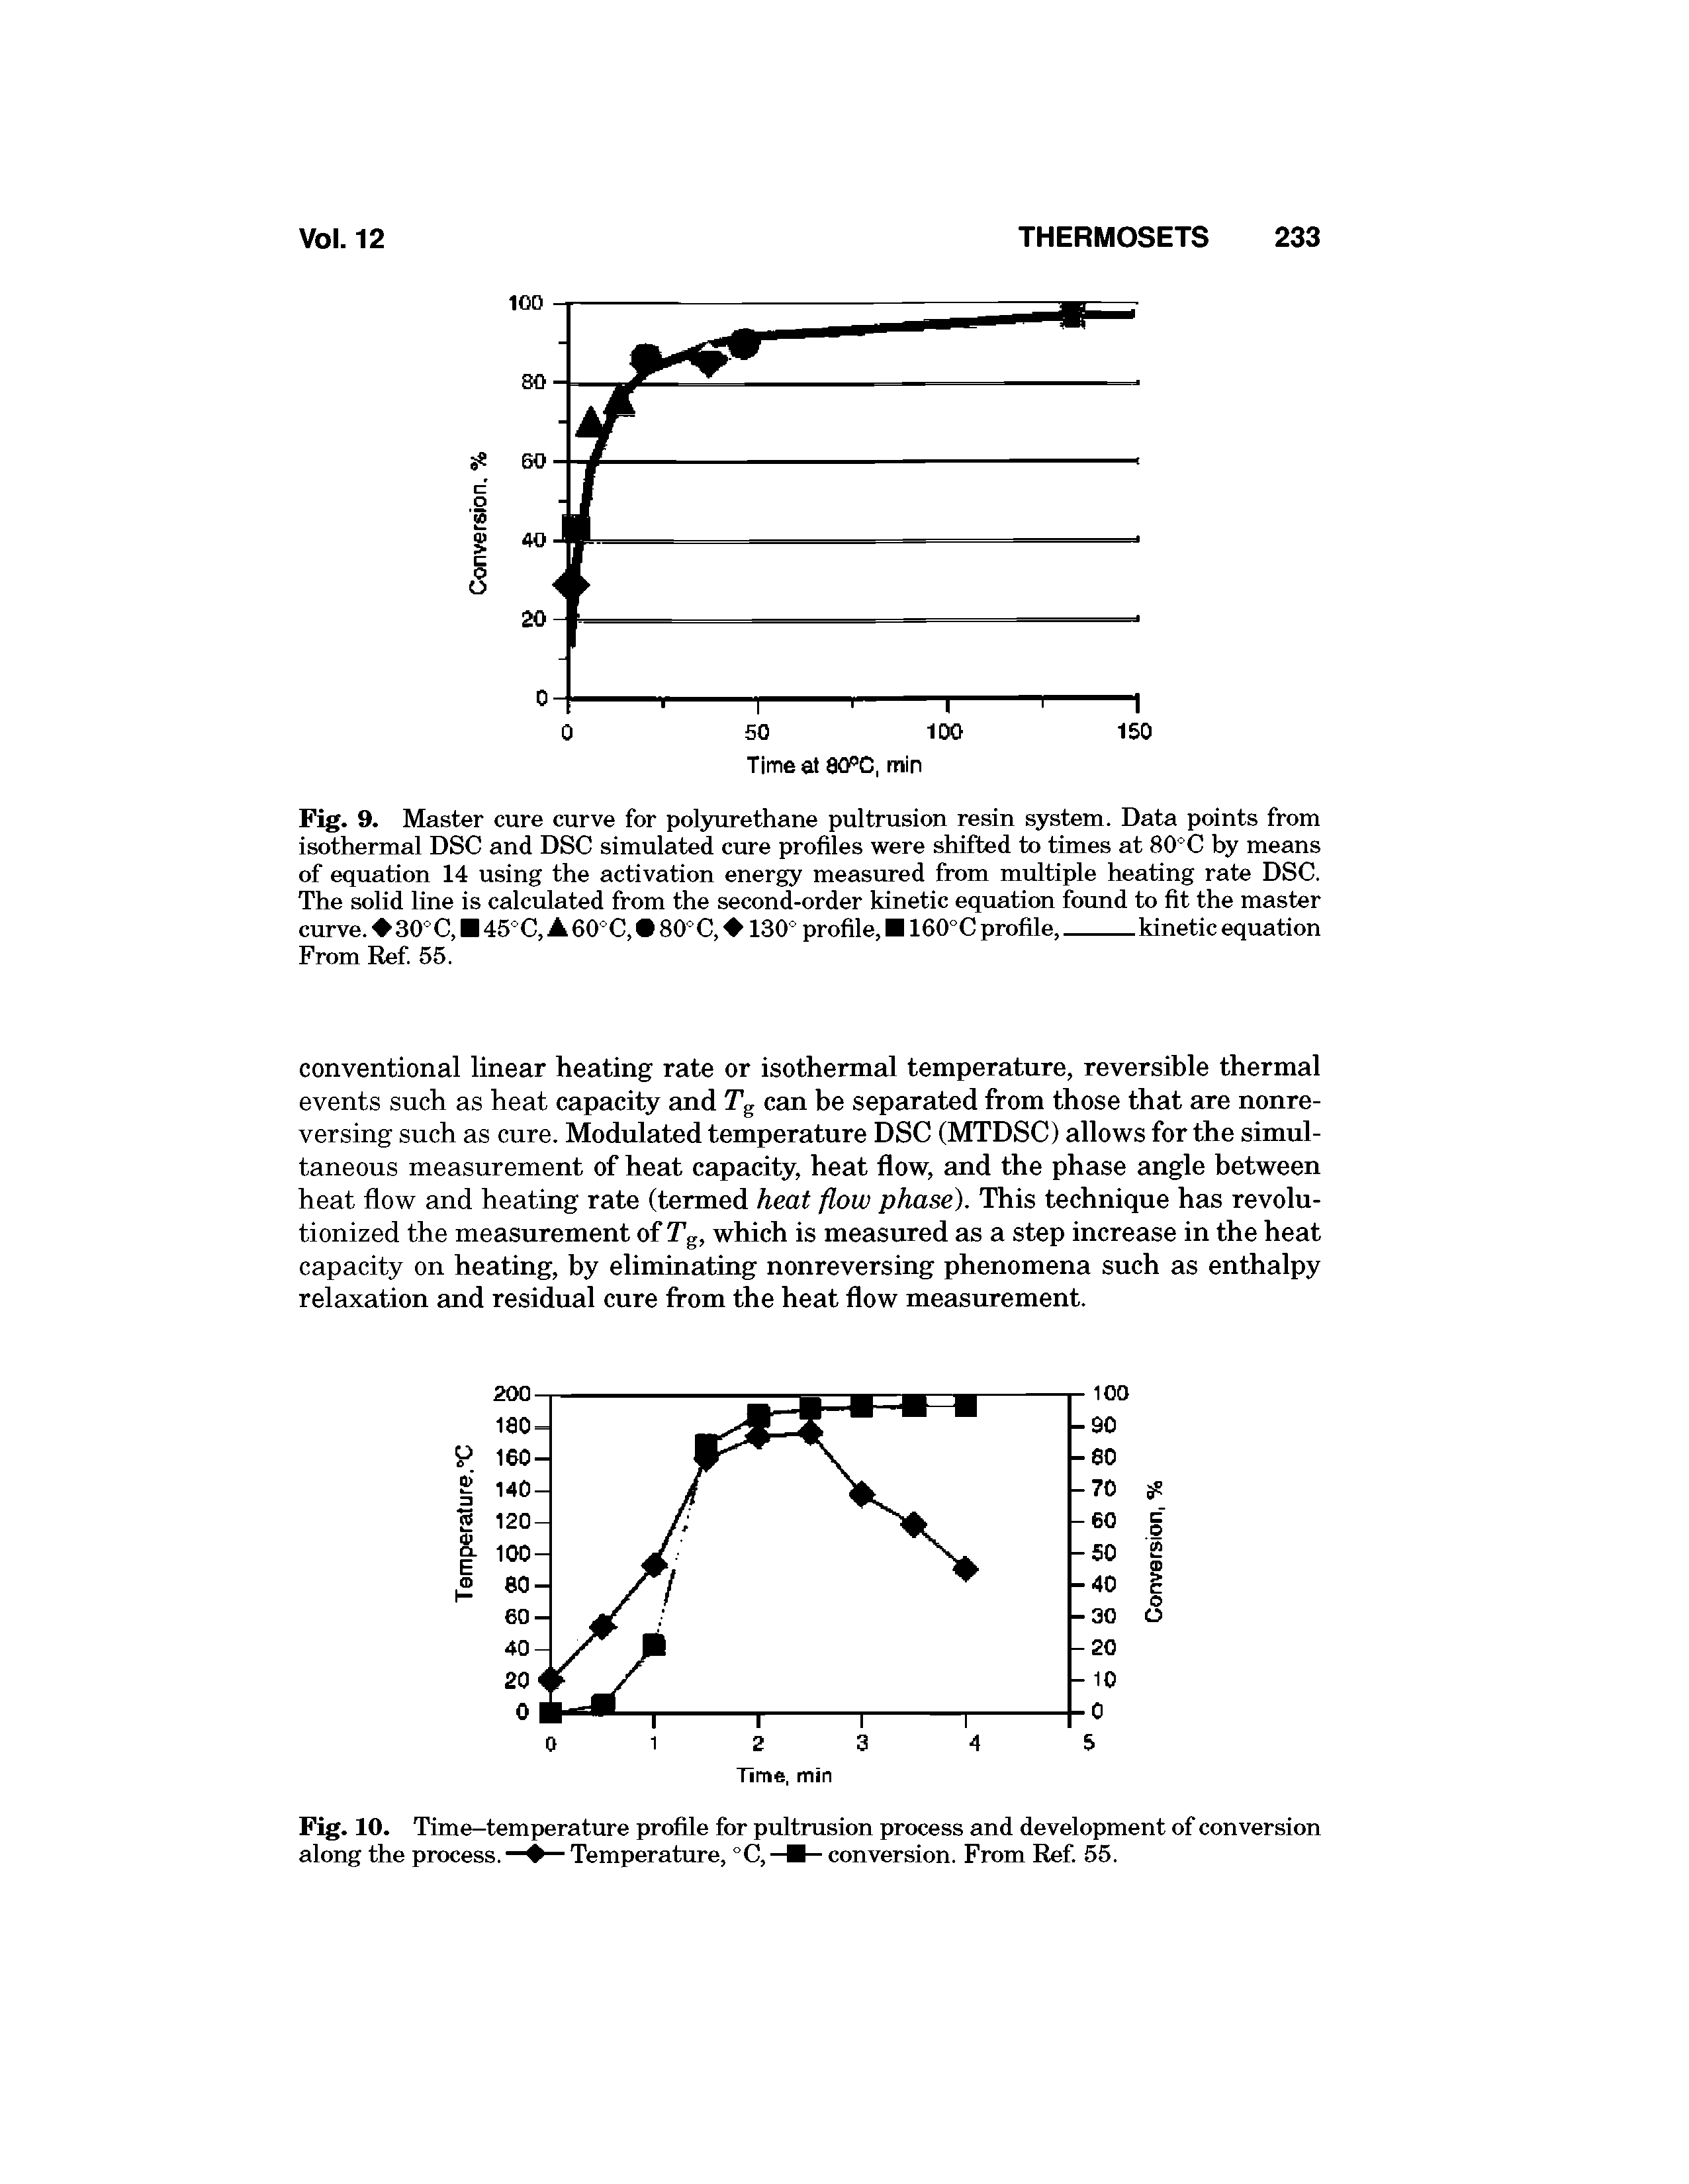 Fig. 9. Master cure curve for polyurethane pultrusion resin system. Data points from isothermal DSC and DSC simulated cure profiles were shifted to times at 80°C by means of equation 14 using the activation energy measured from multiple heating rate DSC. The solid line is calculated from the second-order kinetic equation found to fit the master...